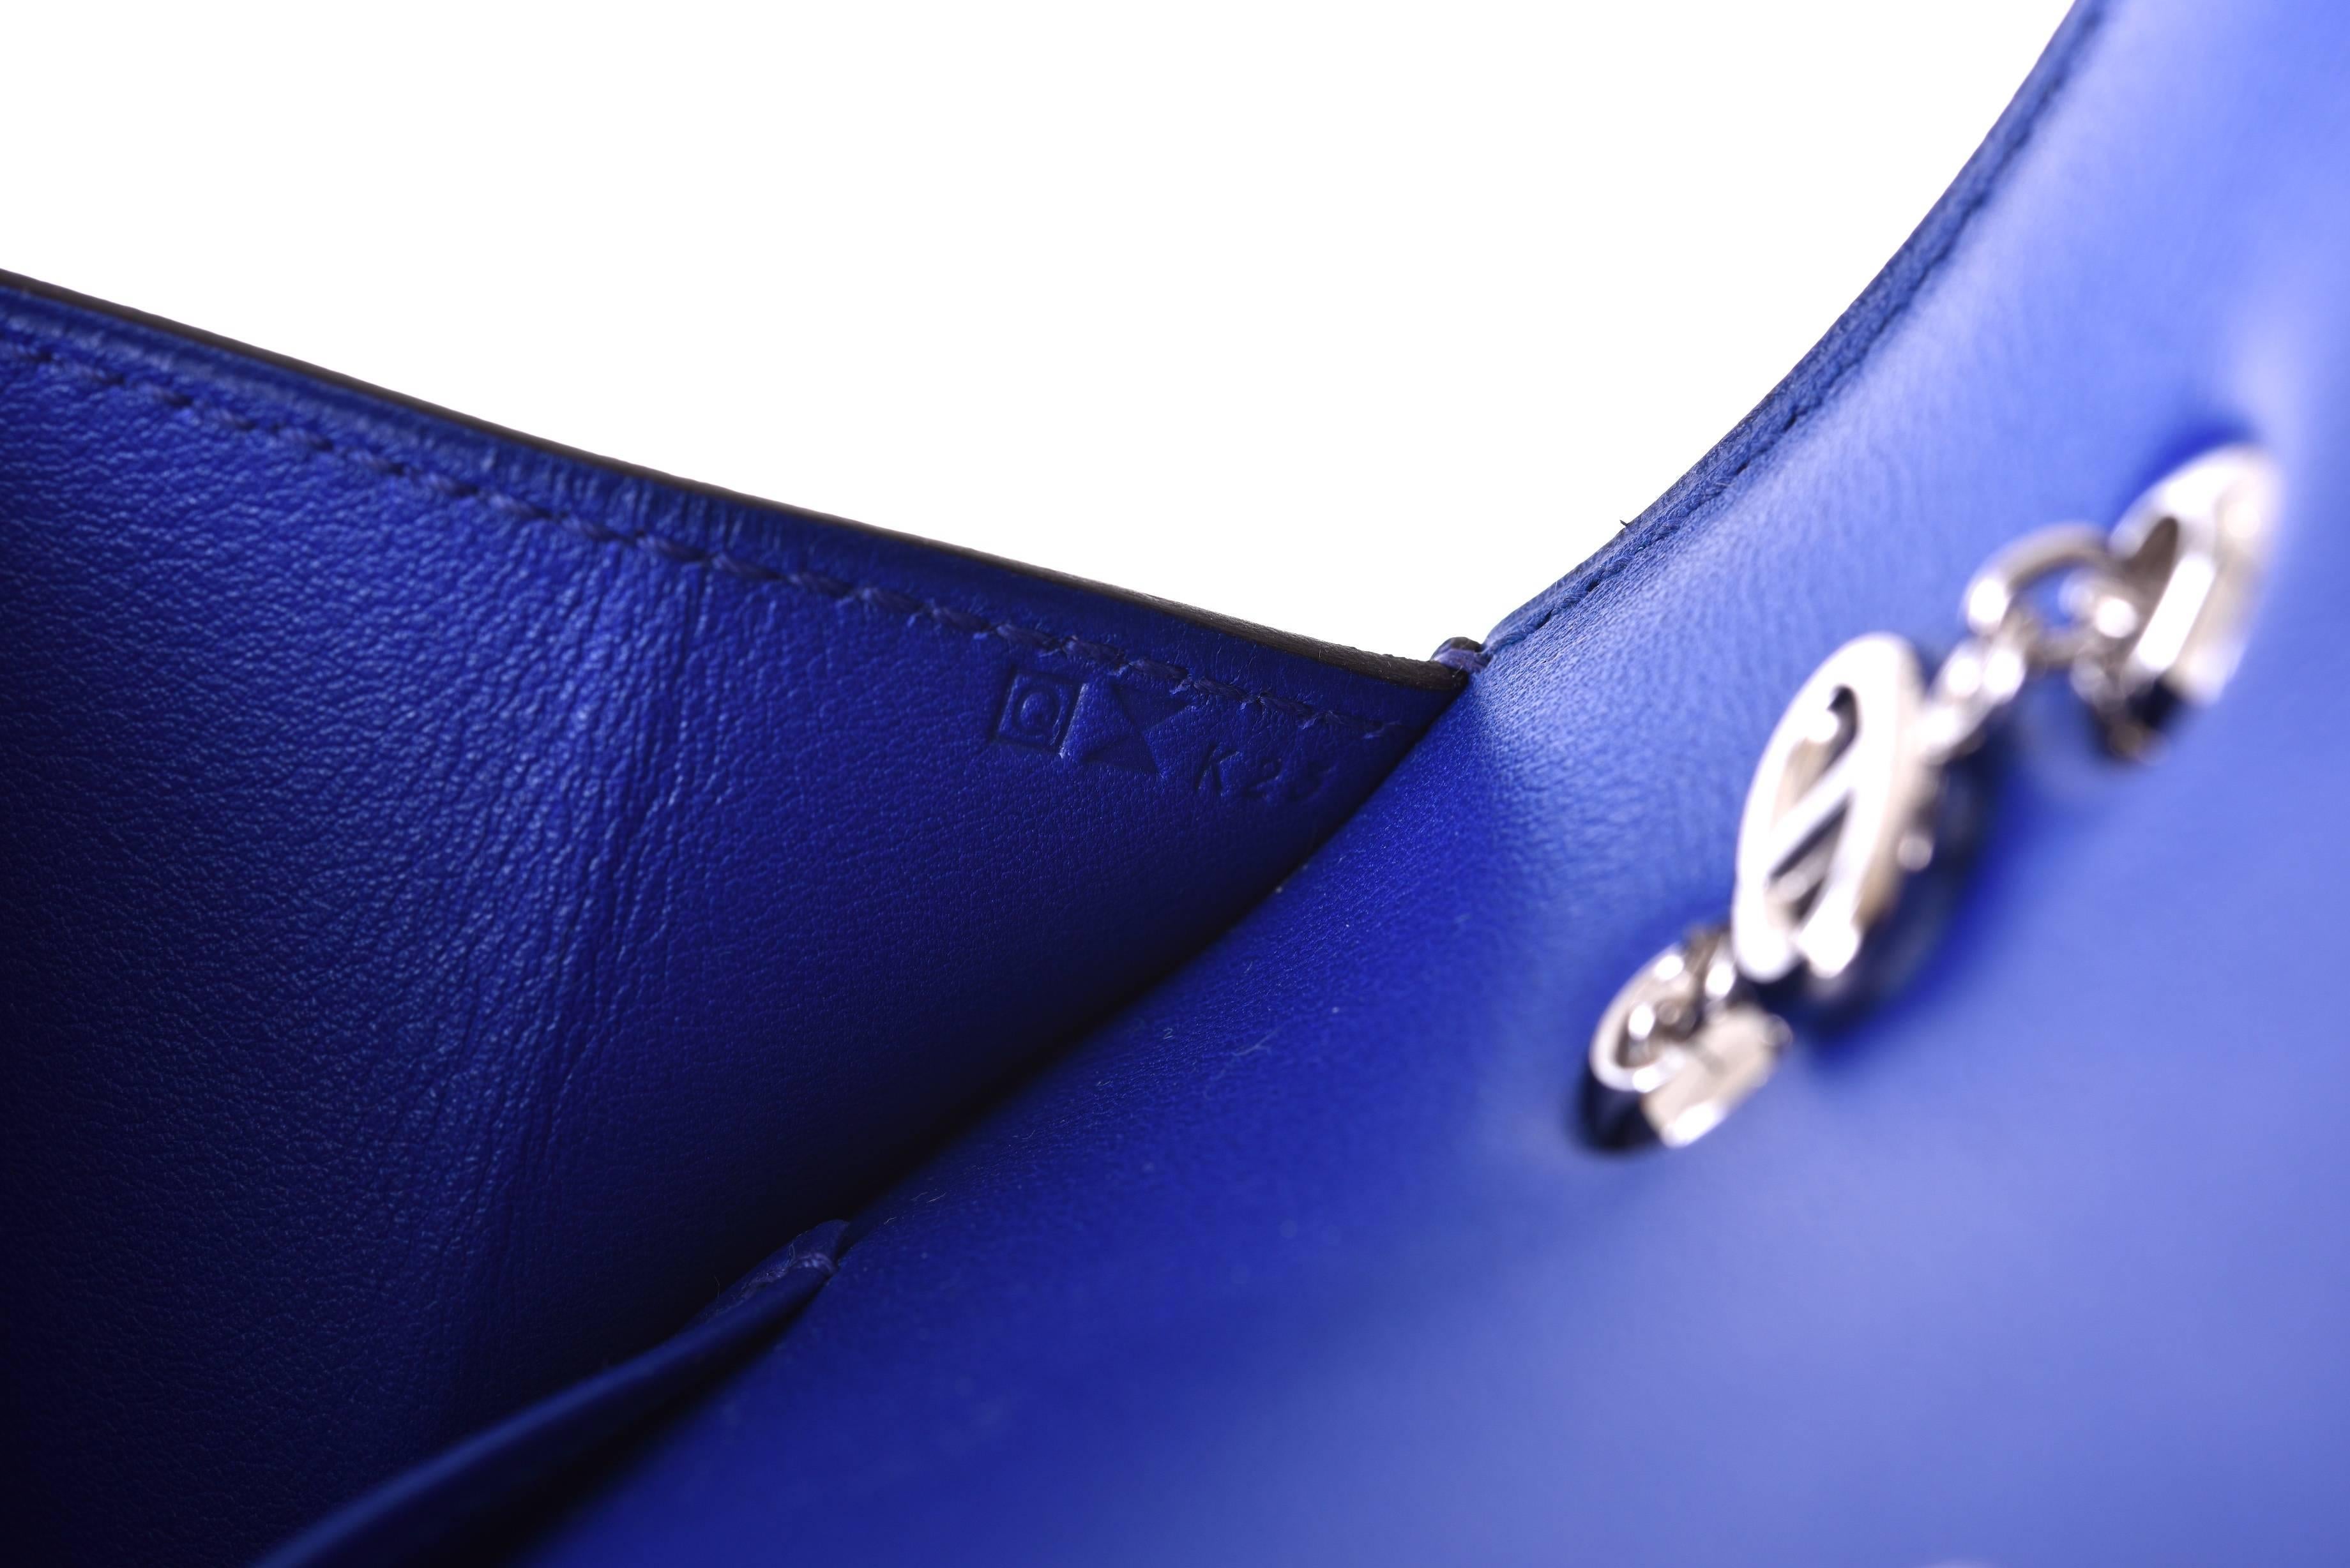 Hermes Catenina Bag Clutch Blue Electric Gorgeous New Bag! JaneFinds 2